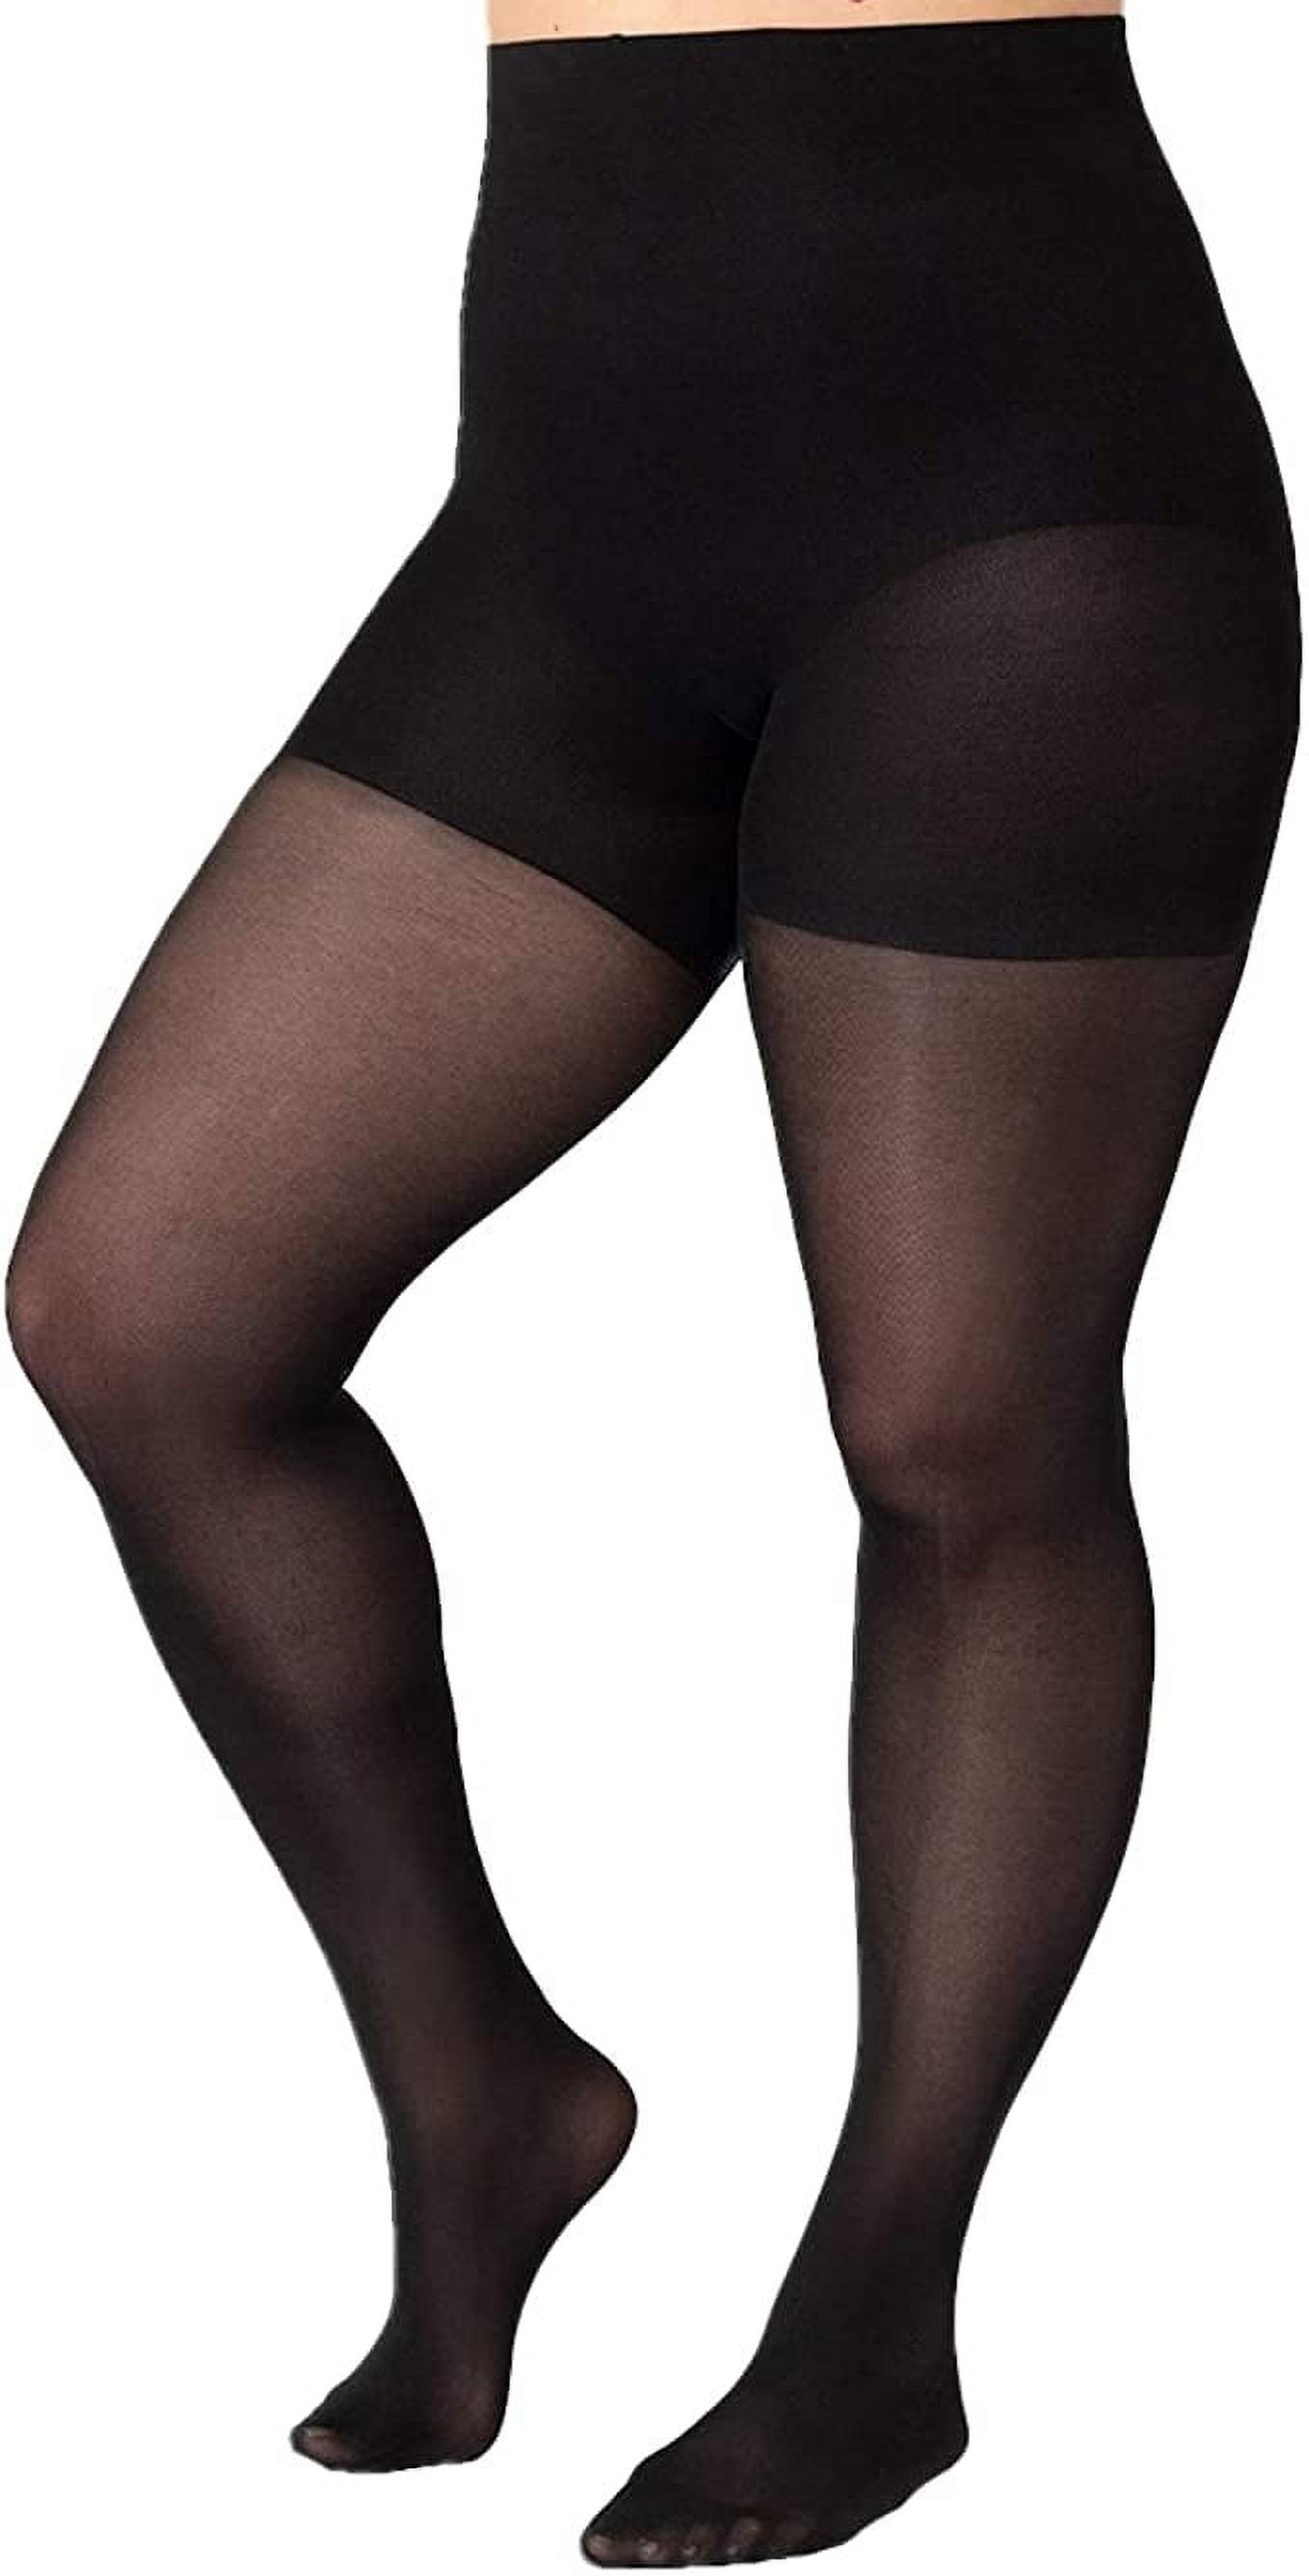 Shapermint Solid Black Opaque Tights with Nylon Control Top Hosiery  Pantyhose (Large)